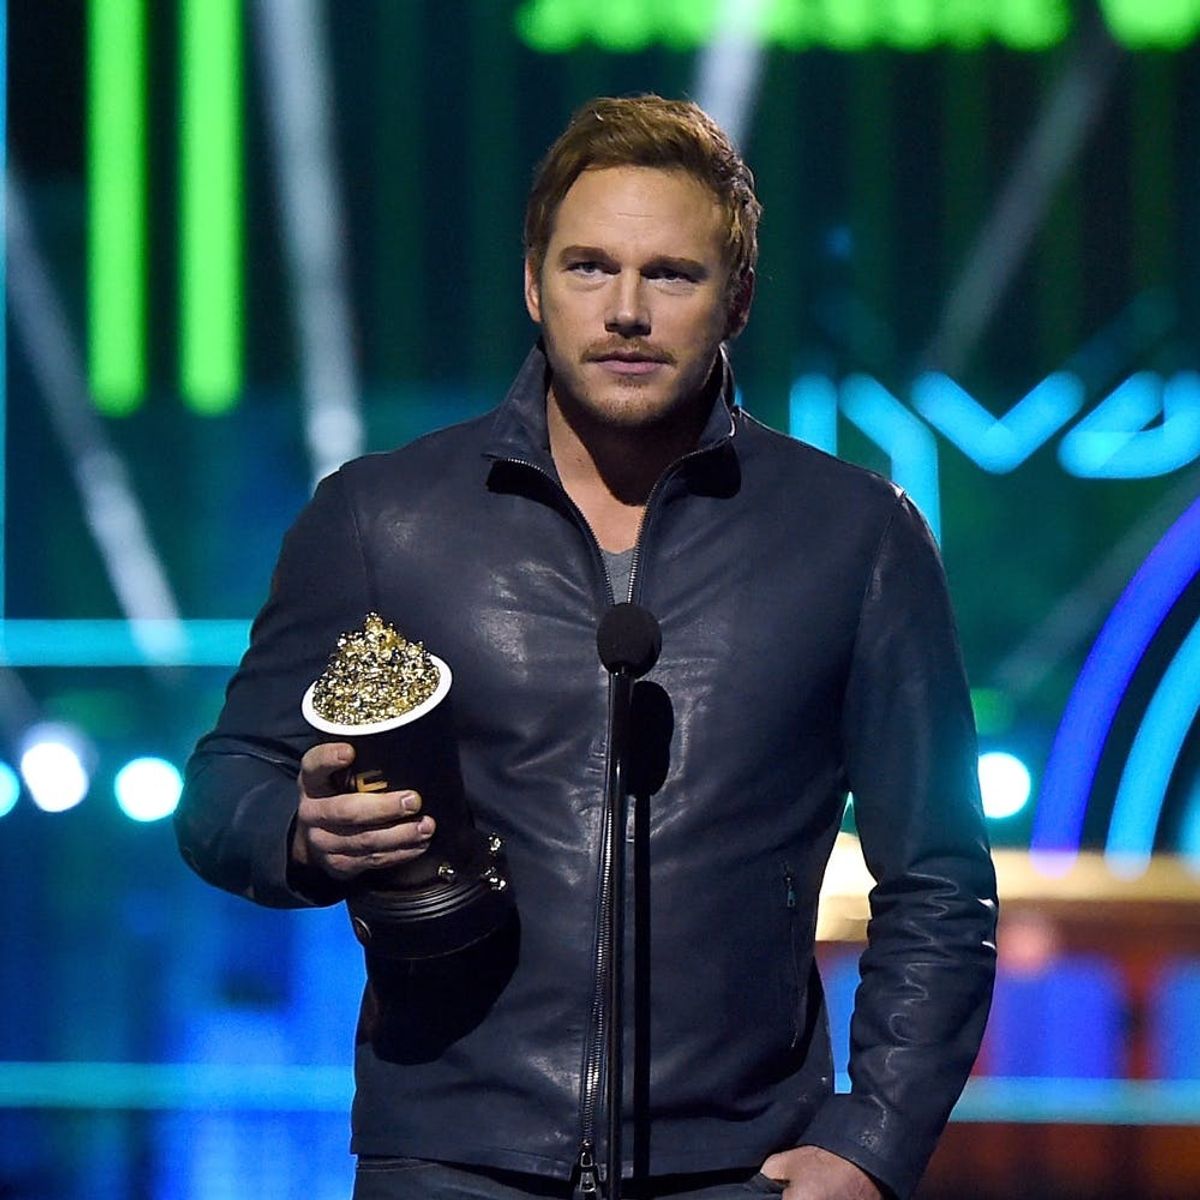 Chris Pratt’s MTV Movie Awards Acceptance Speech Was Equal Parts Hilarious and Adorable